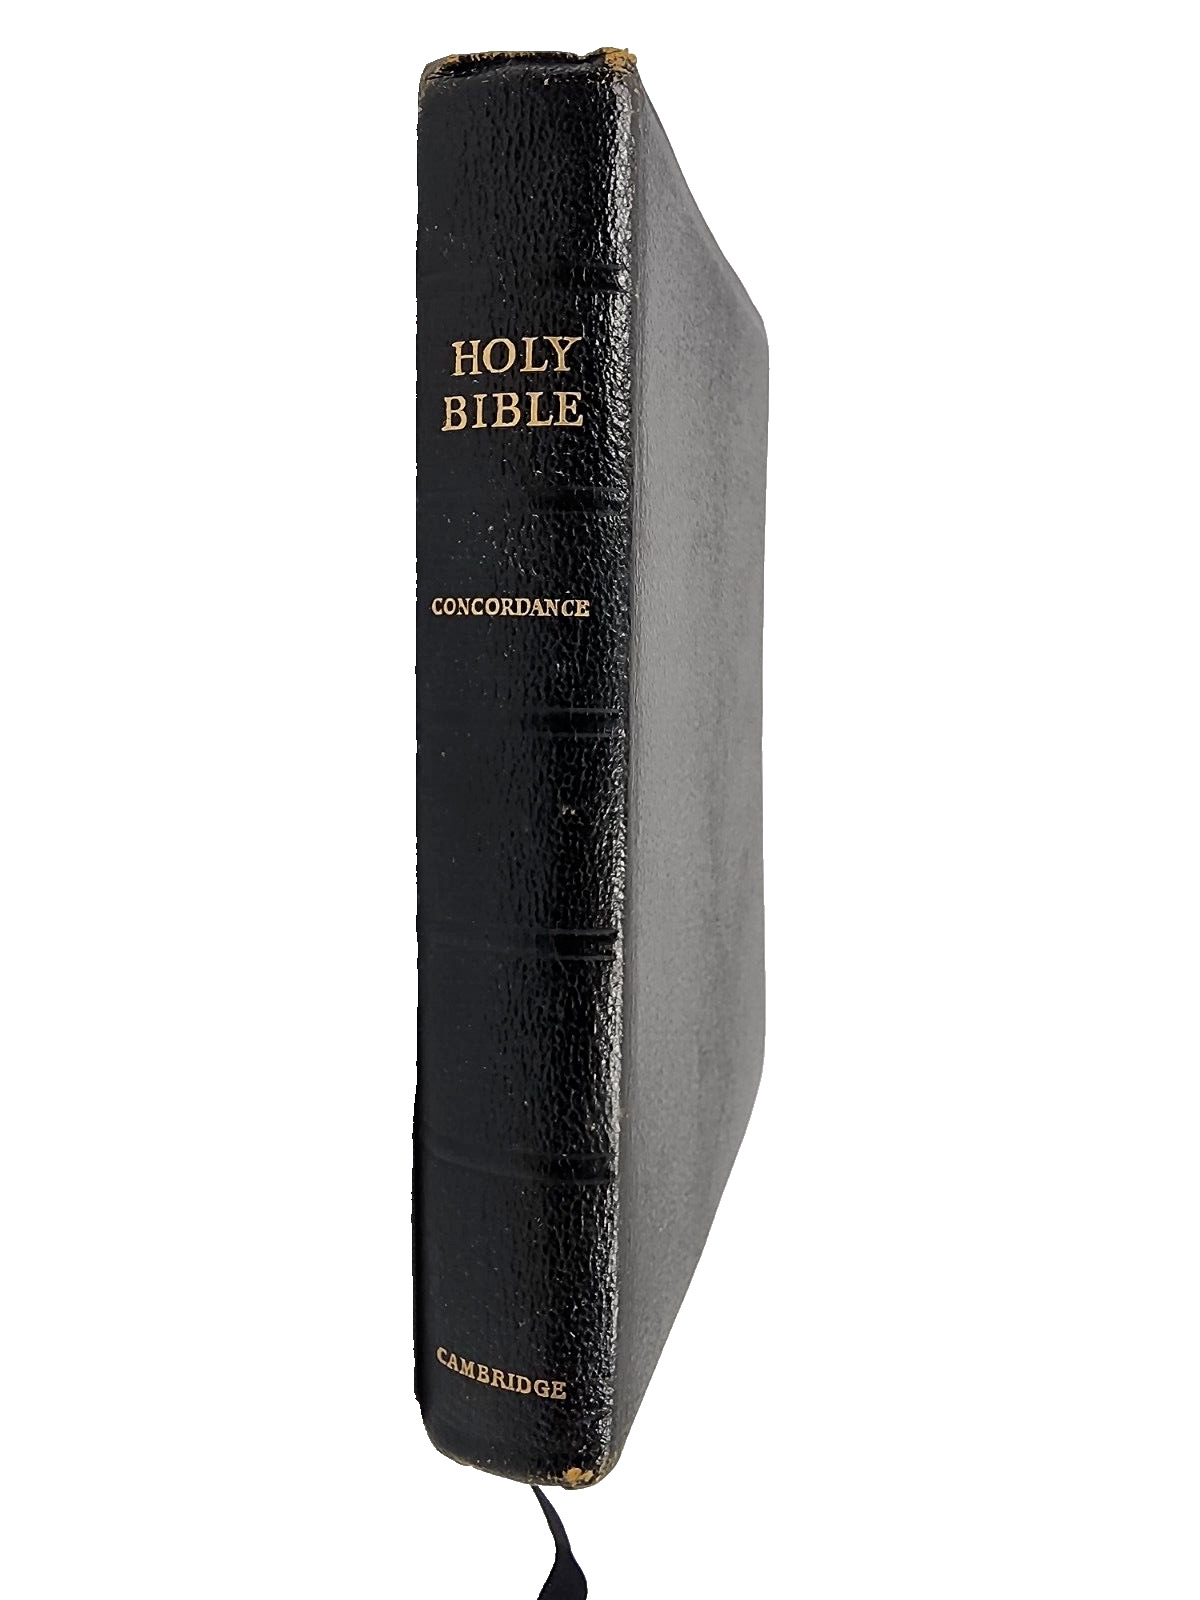 Holy Bible Concordance Cambridge University Press Morocco Leather Lined